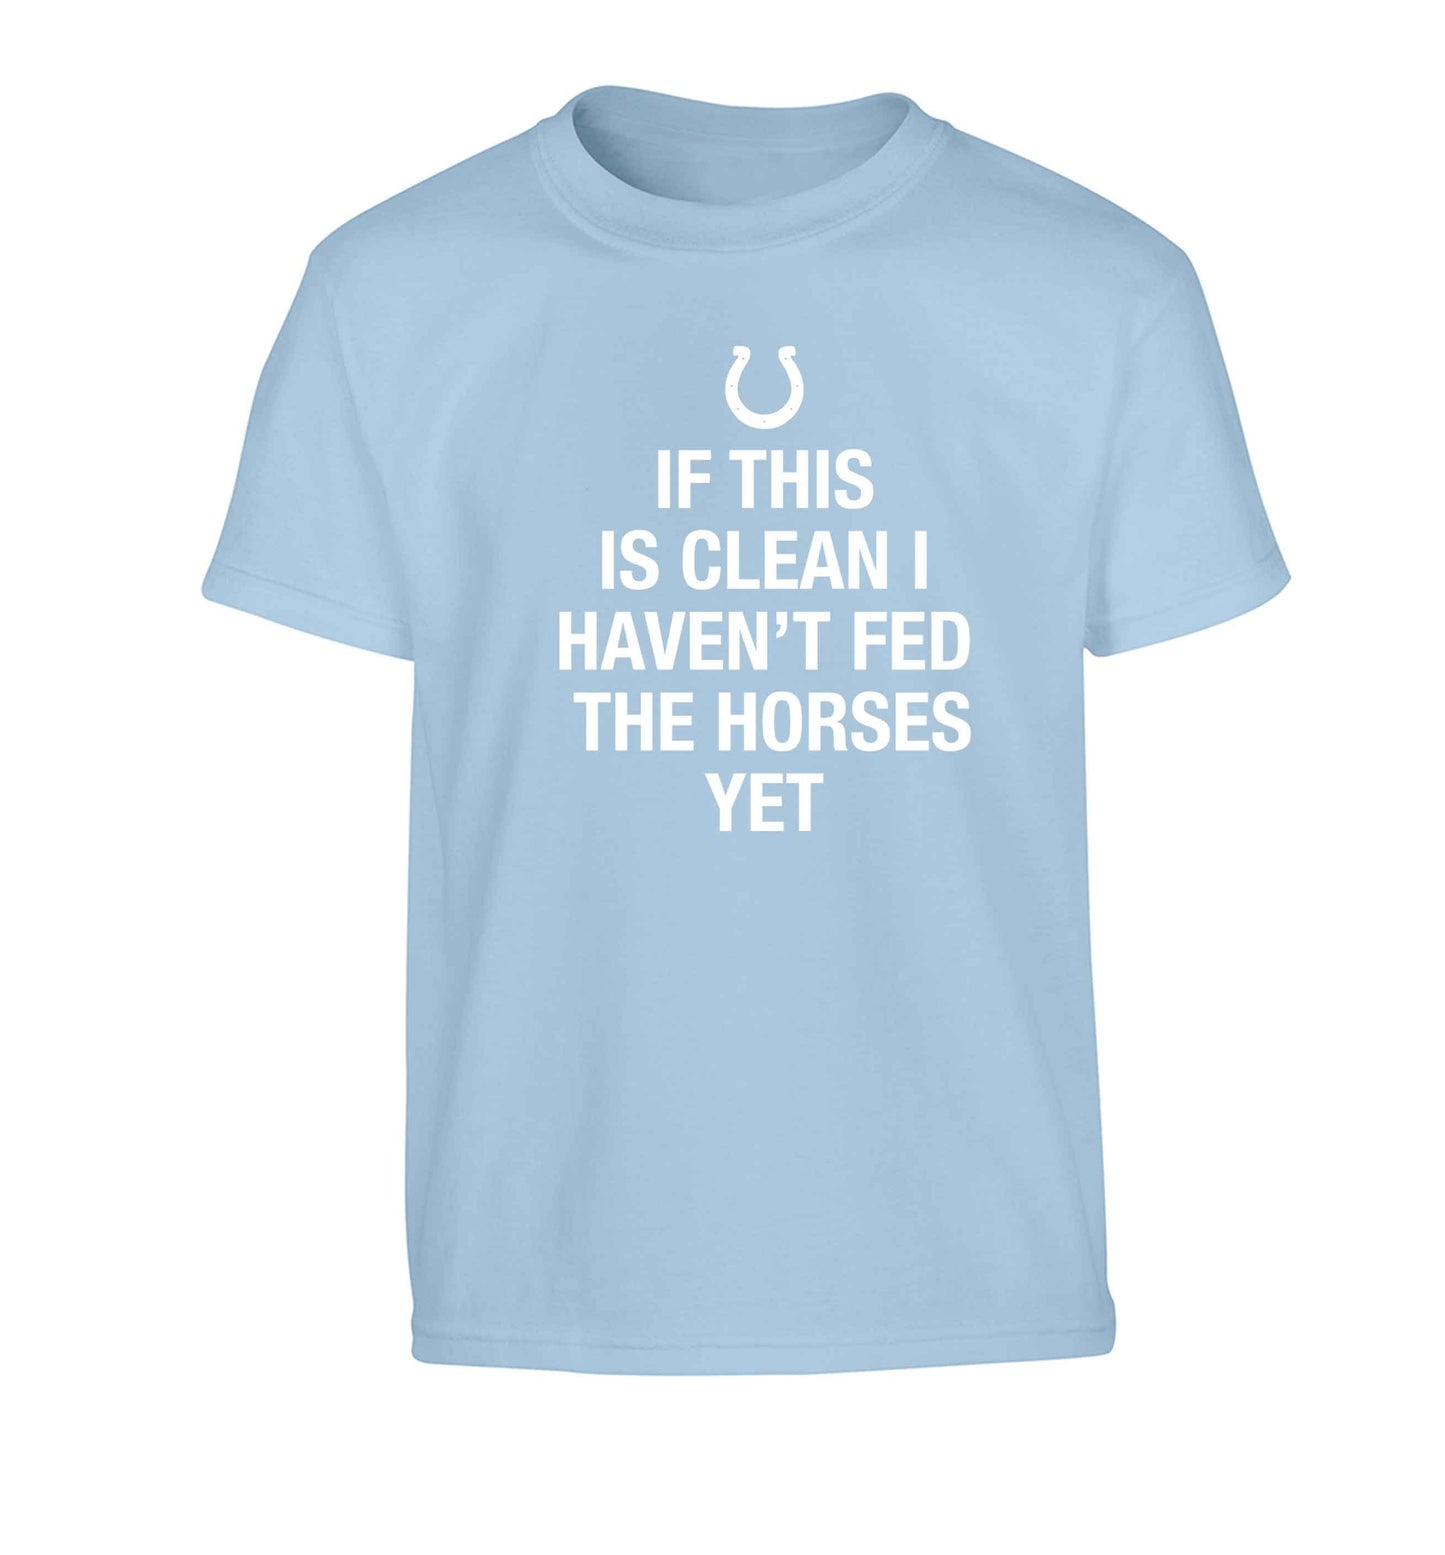 If this isn't clean I haven't fed the horses yet Children's light blue Tshirt 12-13 Years